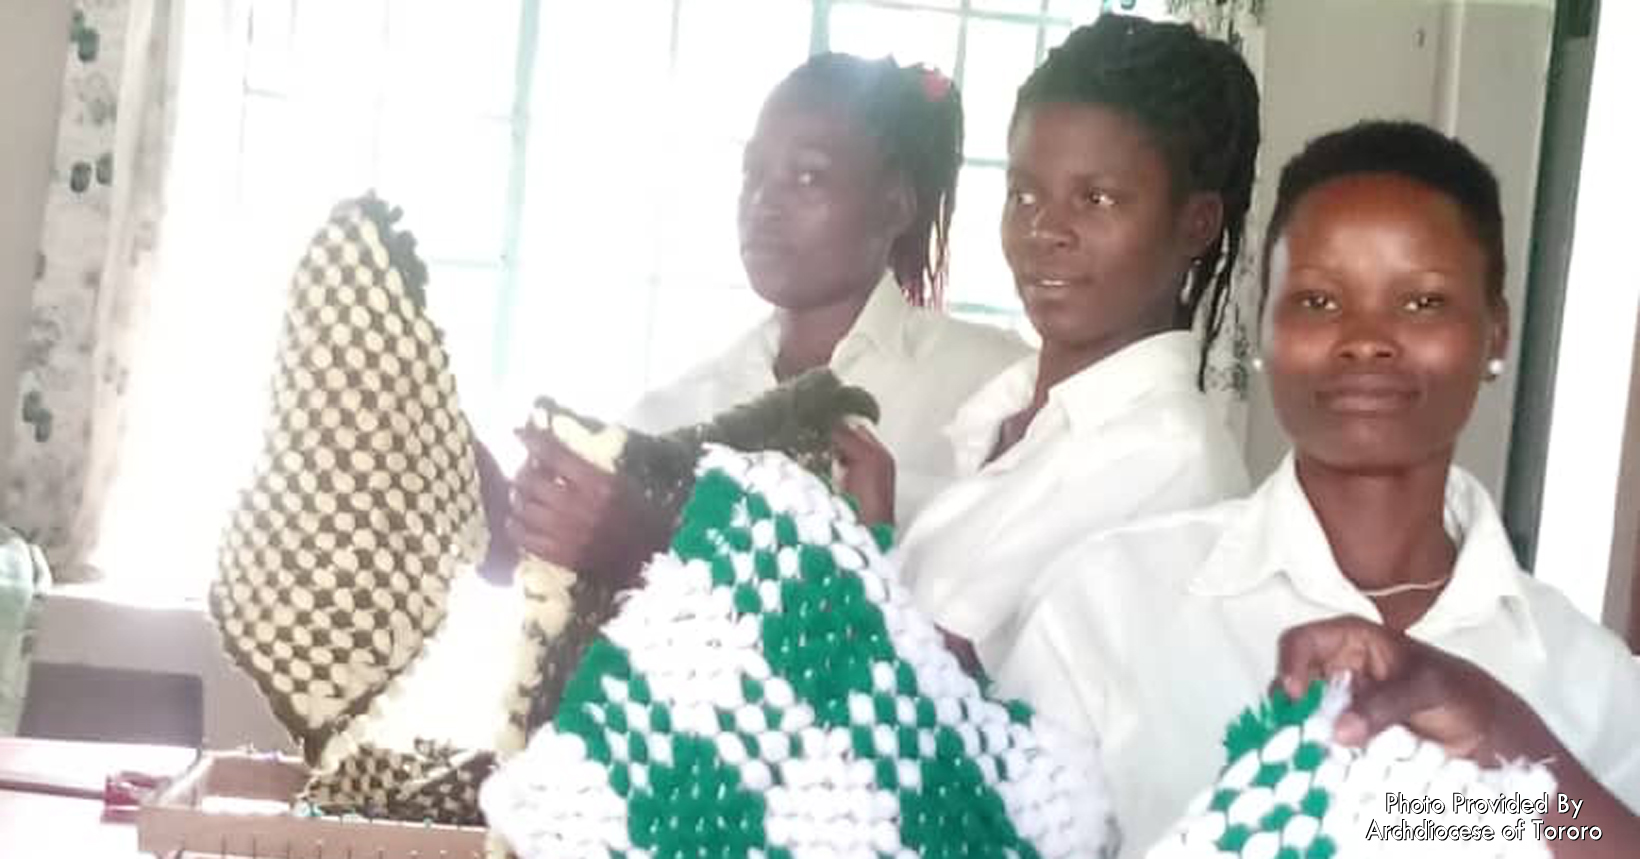 Students who are learning tailoring are showing off their woven tablecloths.